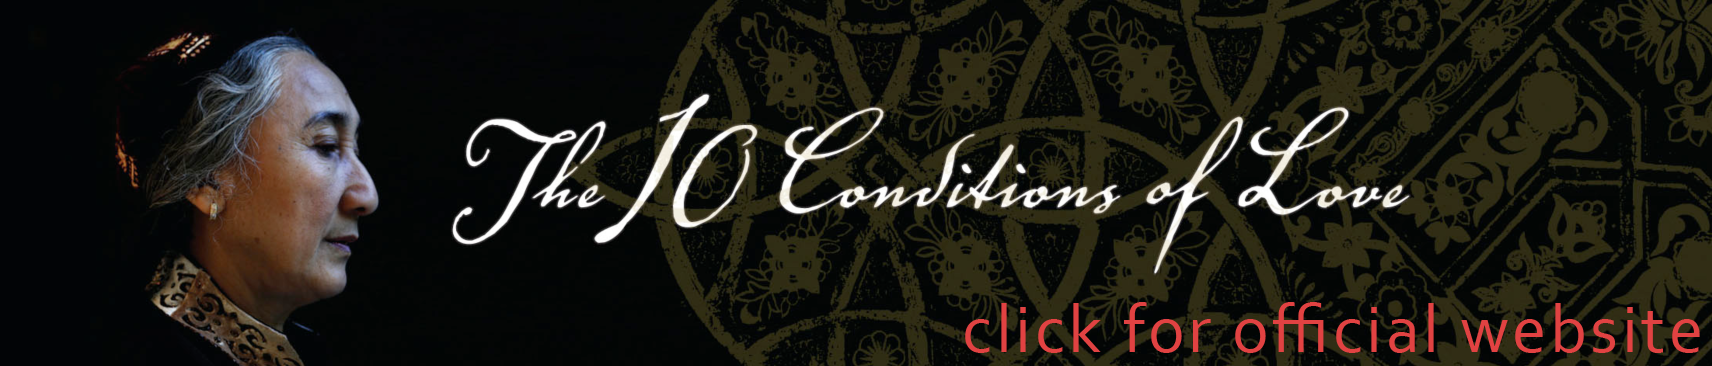 banner 10 conditions of love